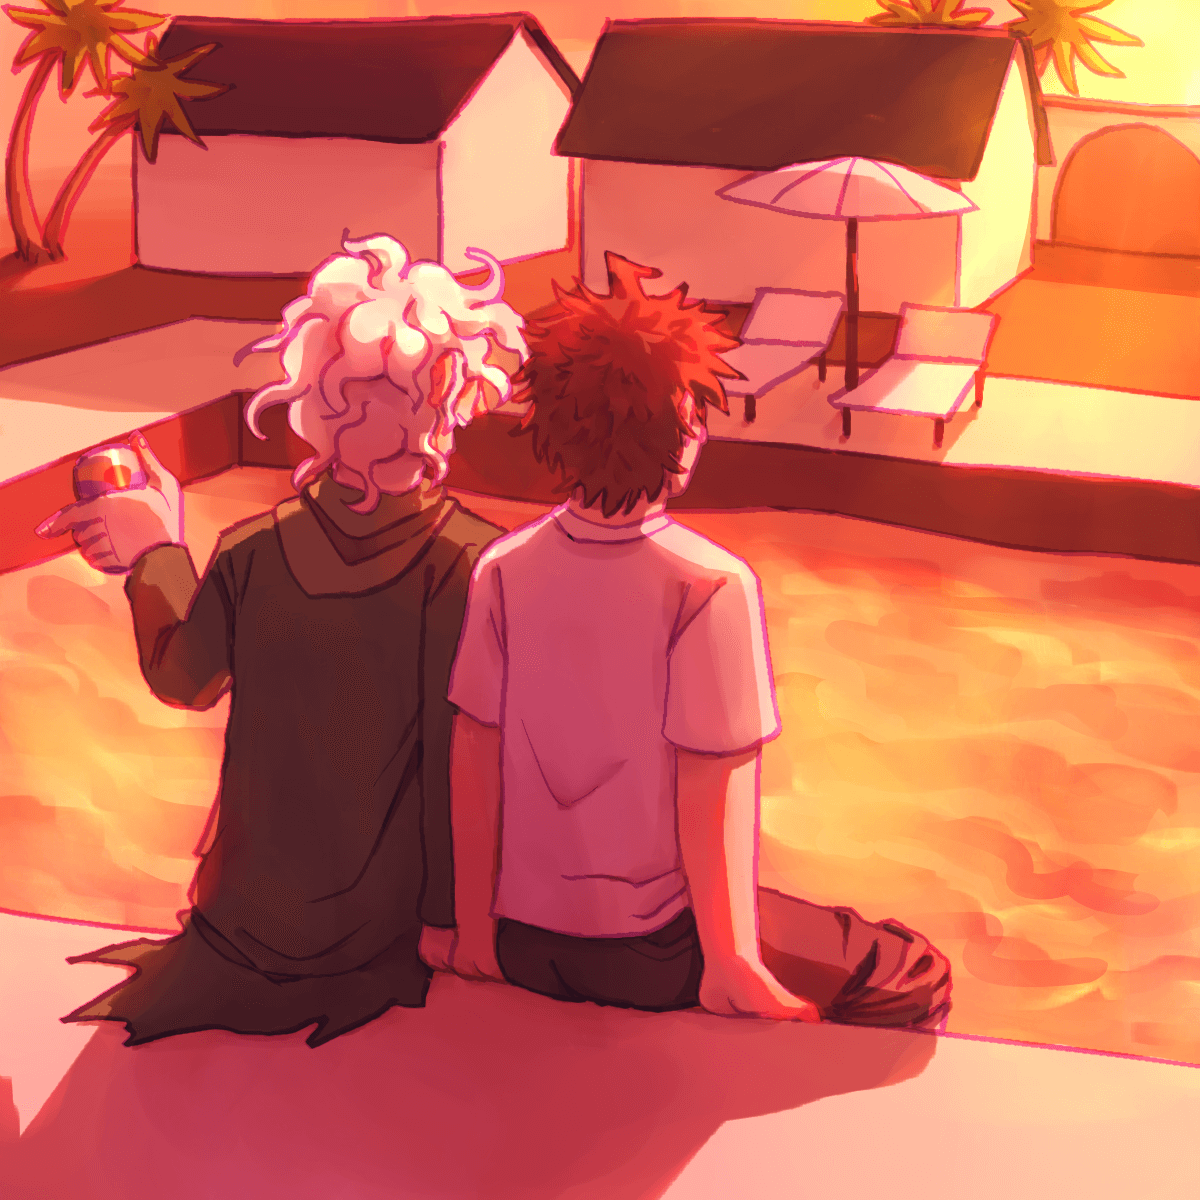 a drawing of nagito and hajime sitting side by side, dangling their legs into the 
		pool at the hotel. buildings and palms can be seen in the background. nagito is holding a can of blue ram and 
		appears to be talking. the whole scene is bathed in sunset lighting.